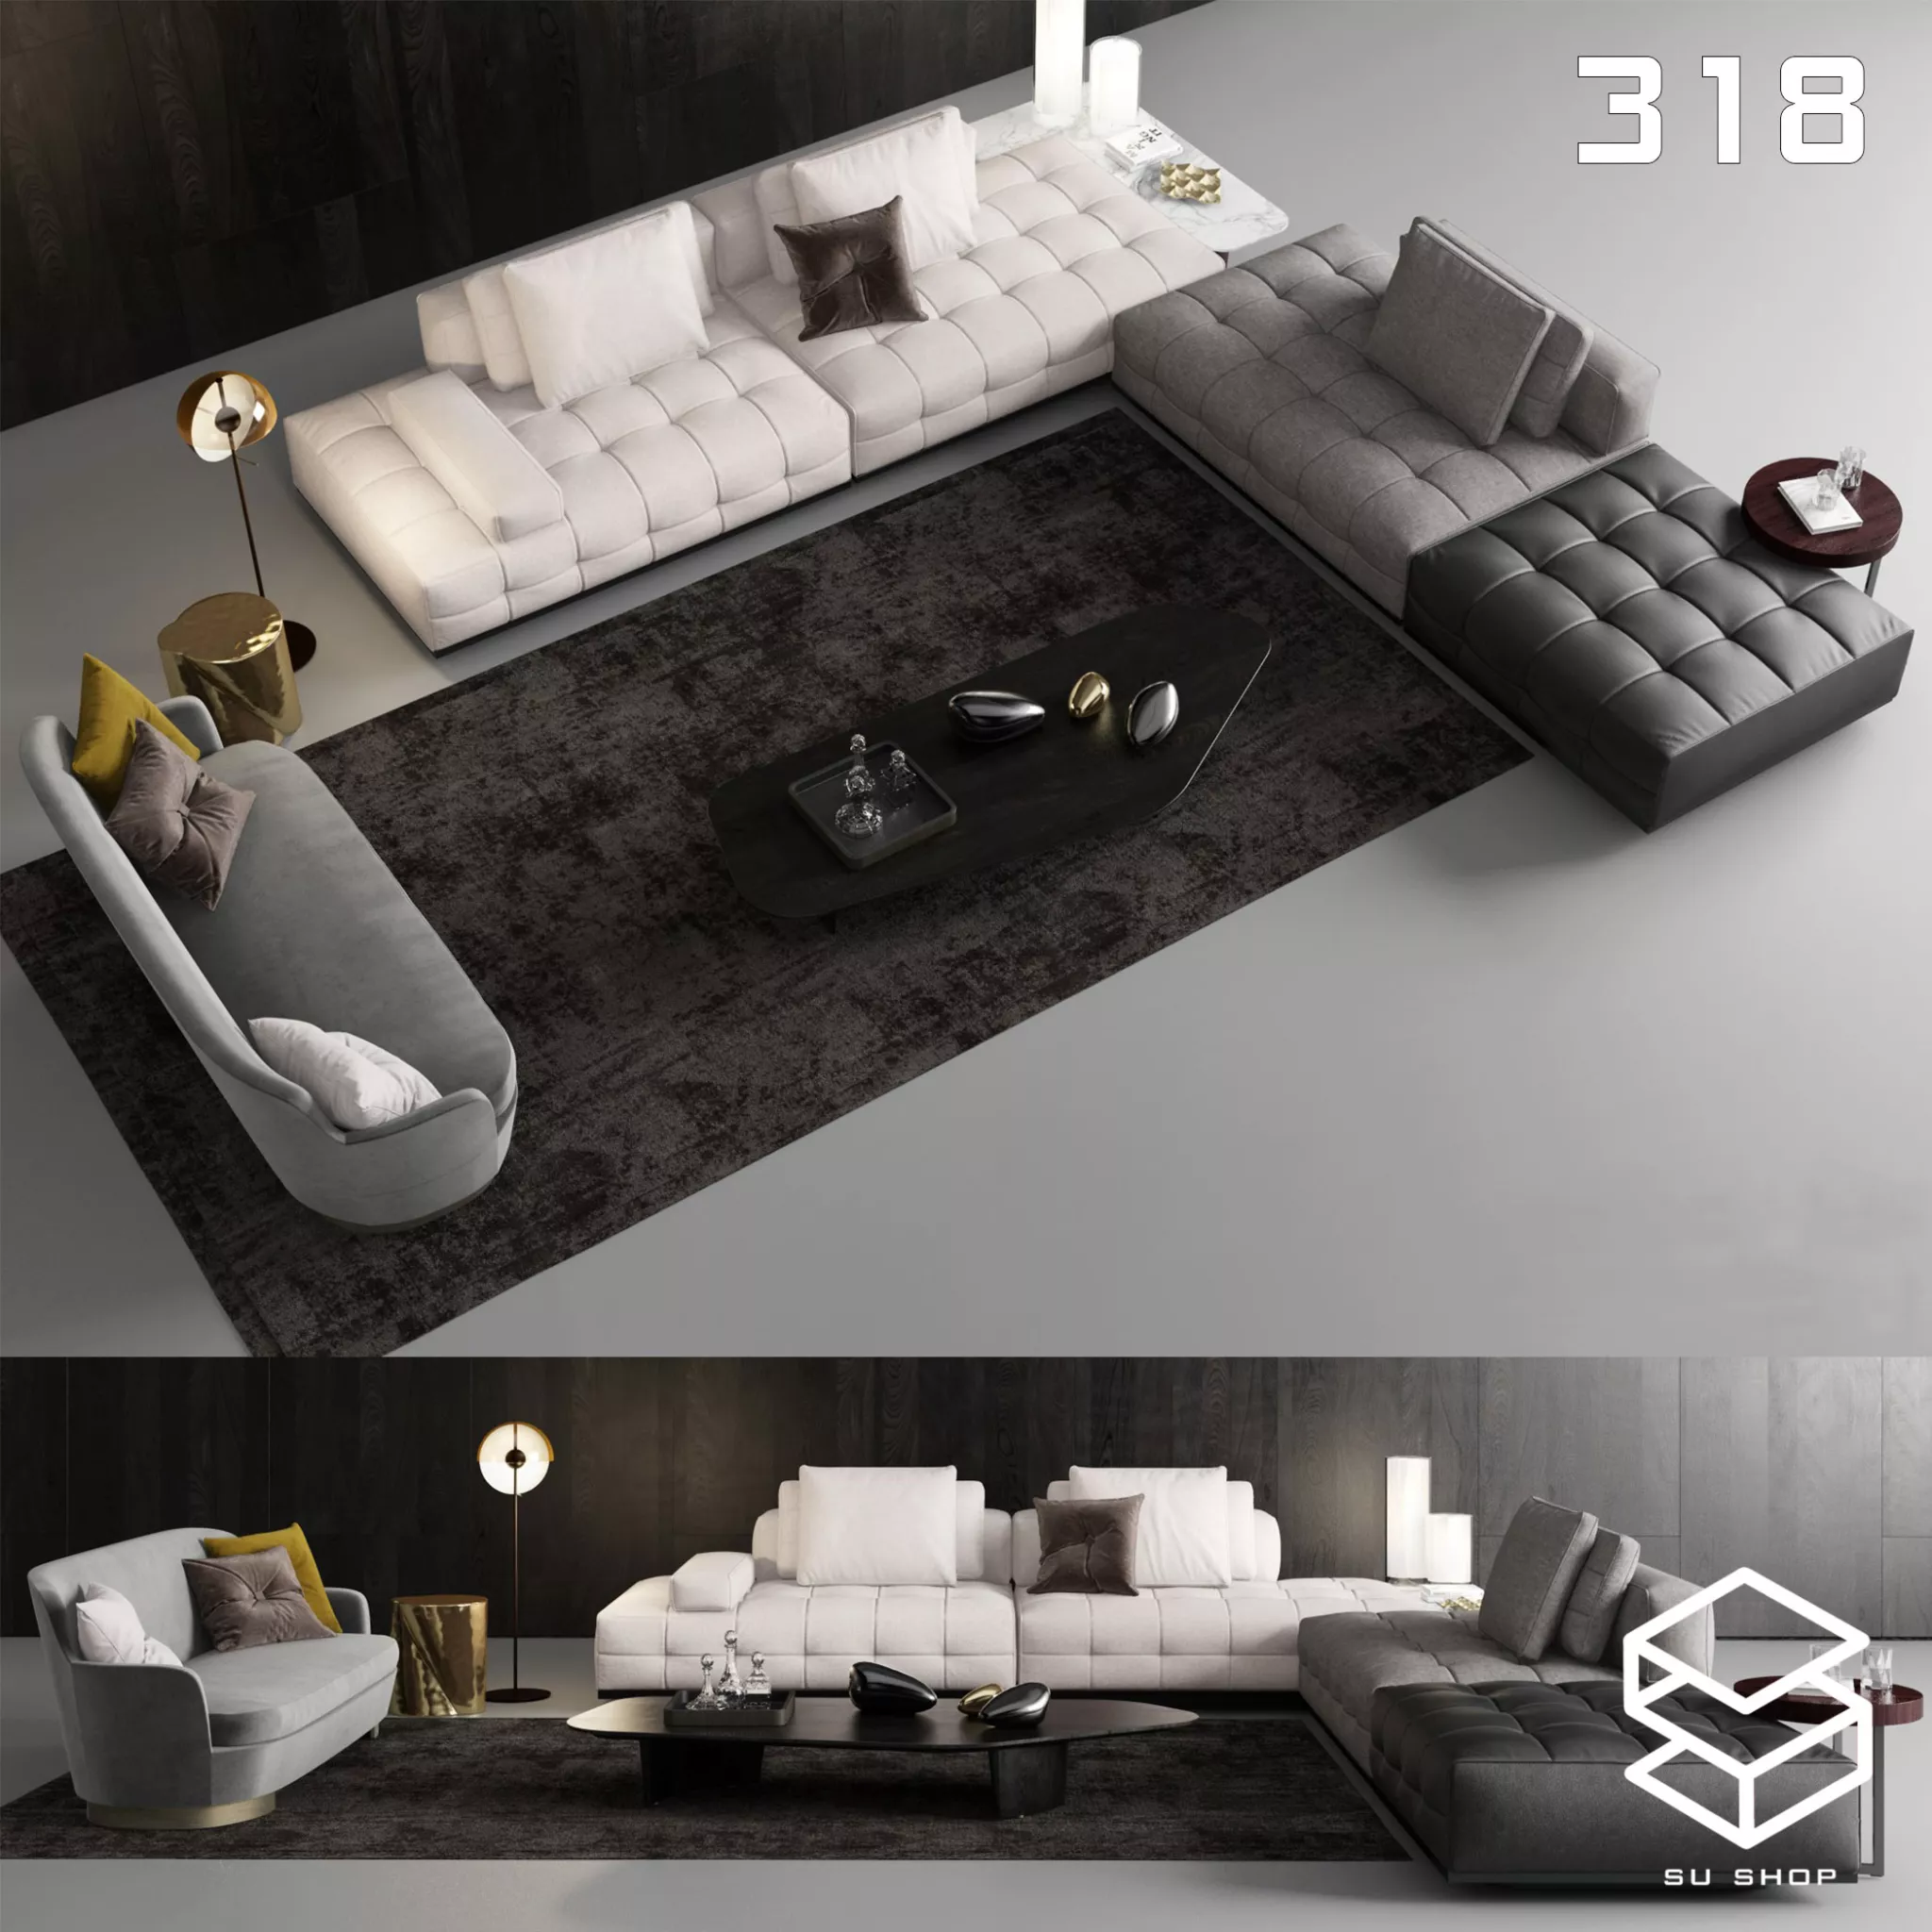 MODERN SOFA - SKETCHUP 3D MODEL - VRAY OR ENSCAPE - ID13628